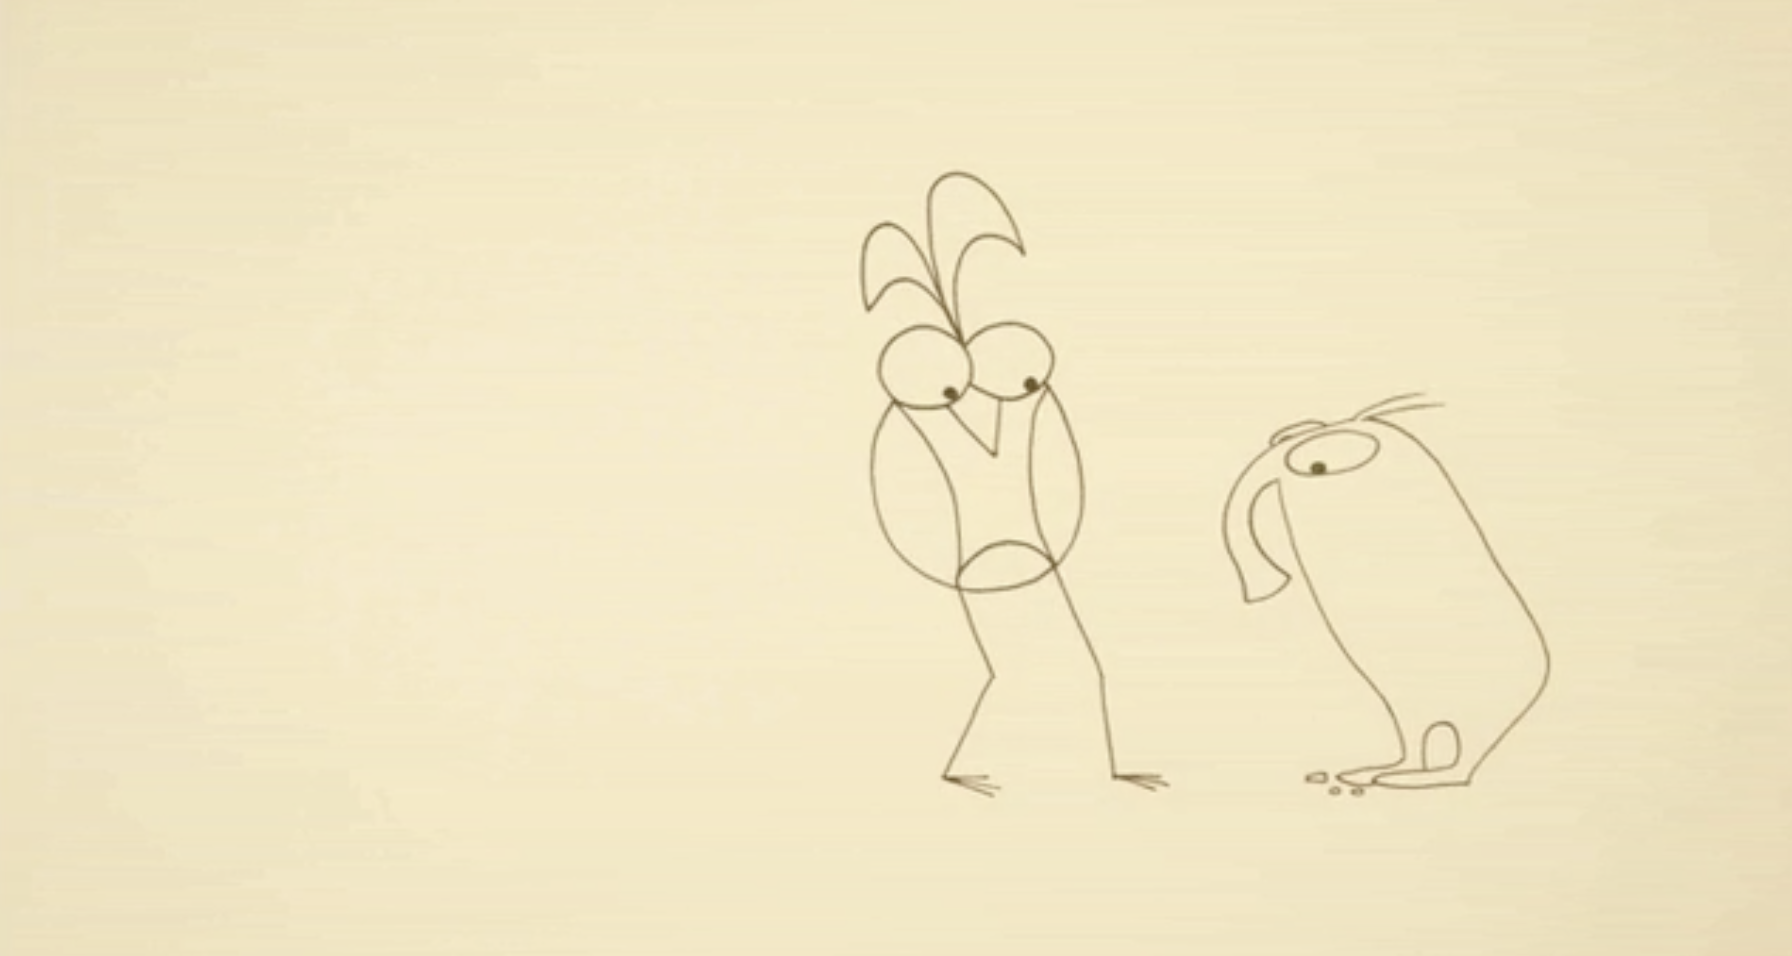 Frame from a Stephanie Smith animation of two line drawing figures look down